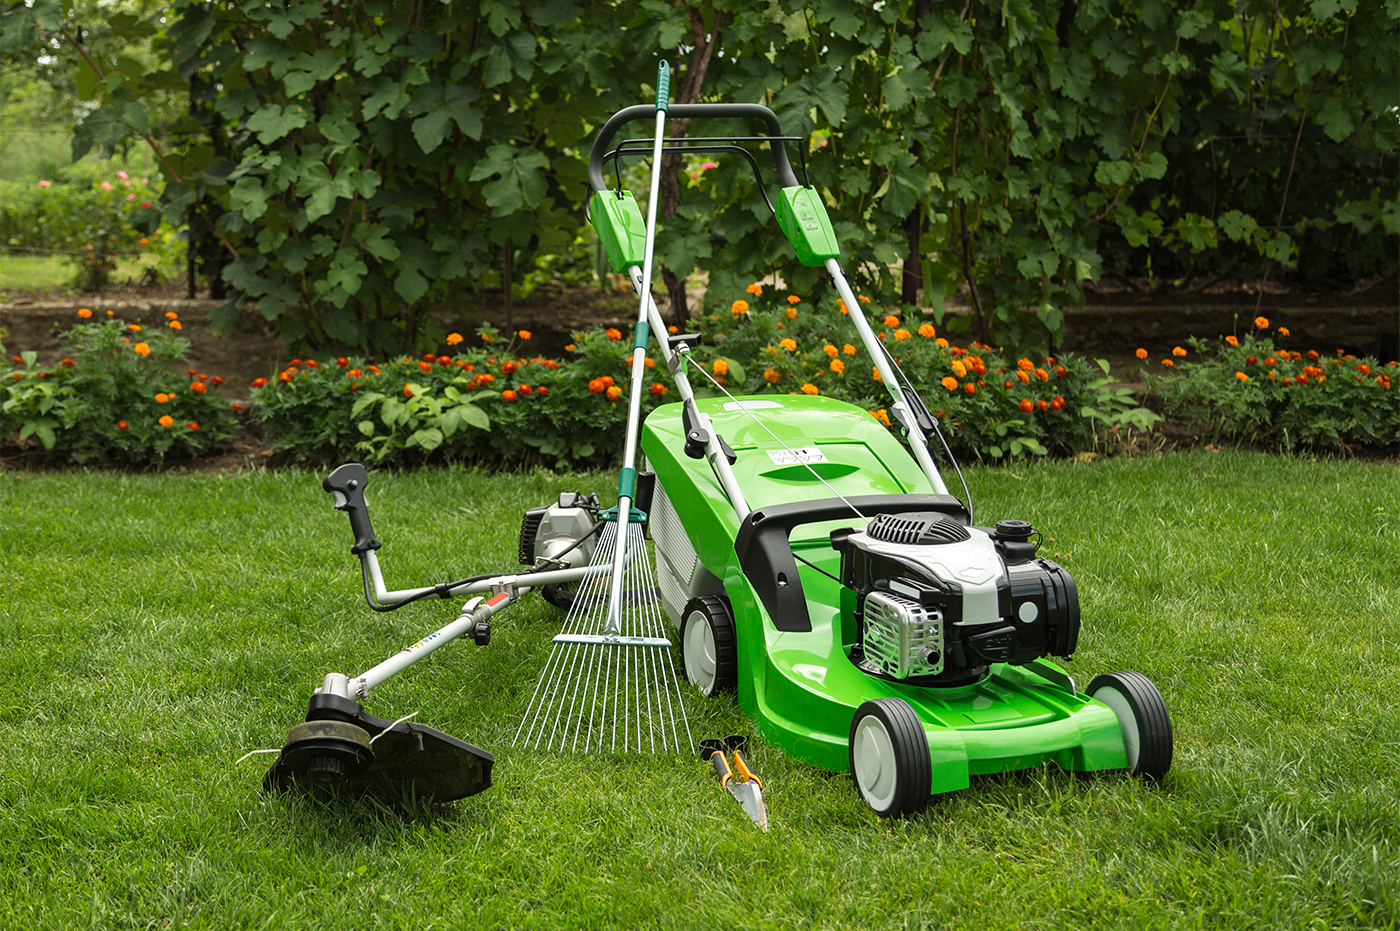 A lawnmower and lawncare tools.